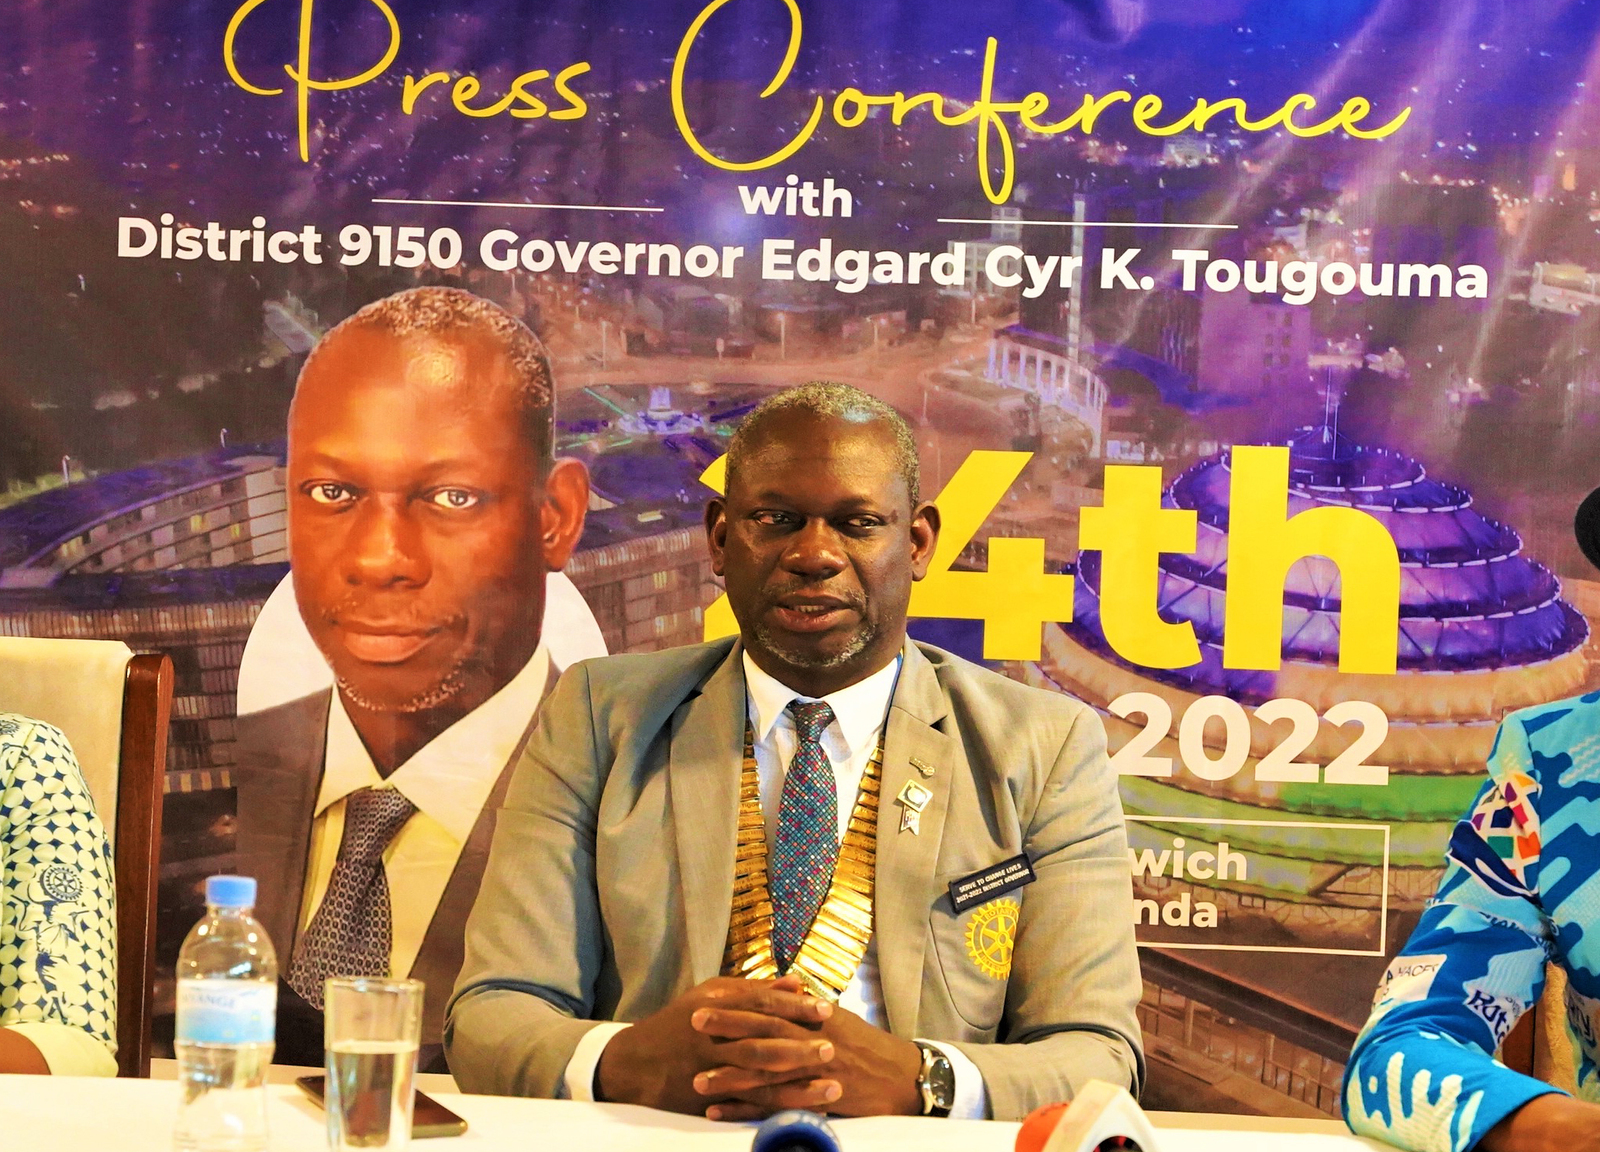 Edgar Tougouma, the District Governor of Rotary International in Central Africa speaks to media during his visit in Kigali on on March 24, 2022. 